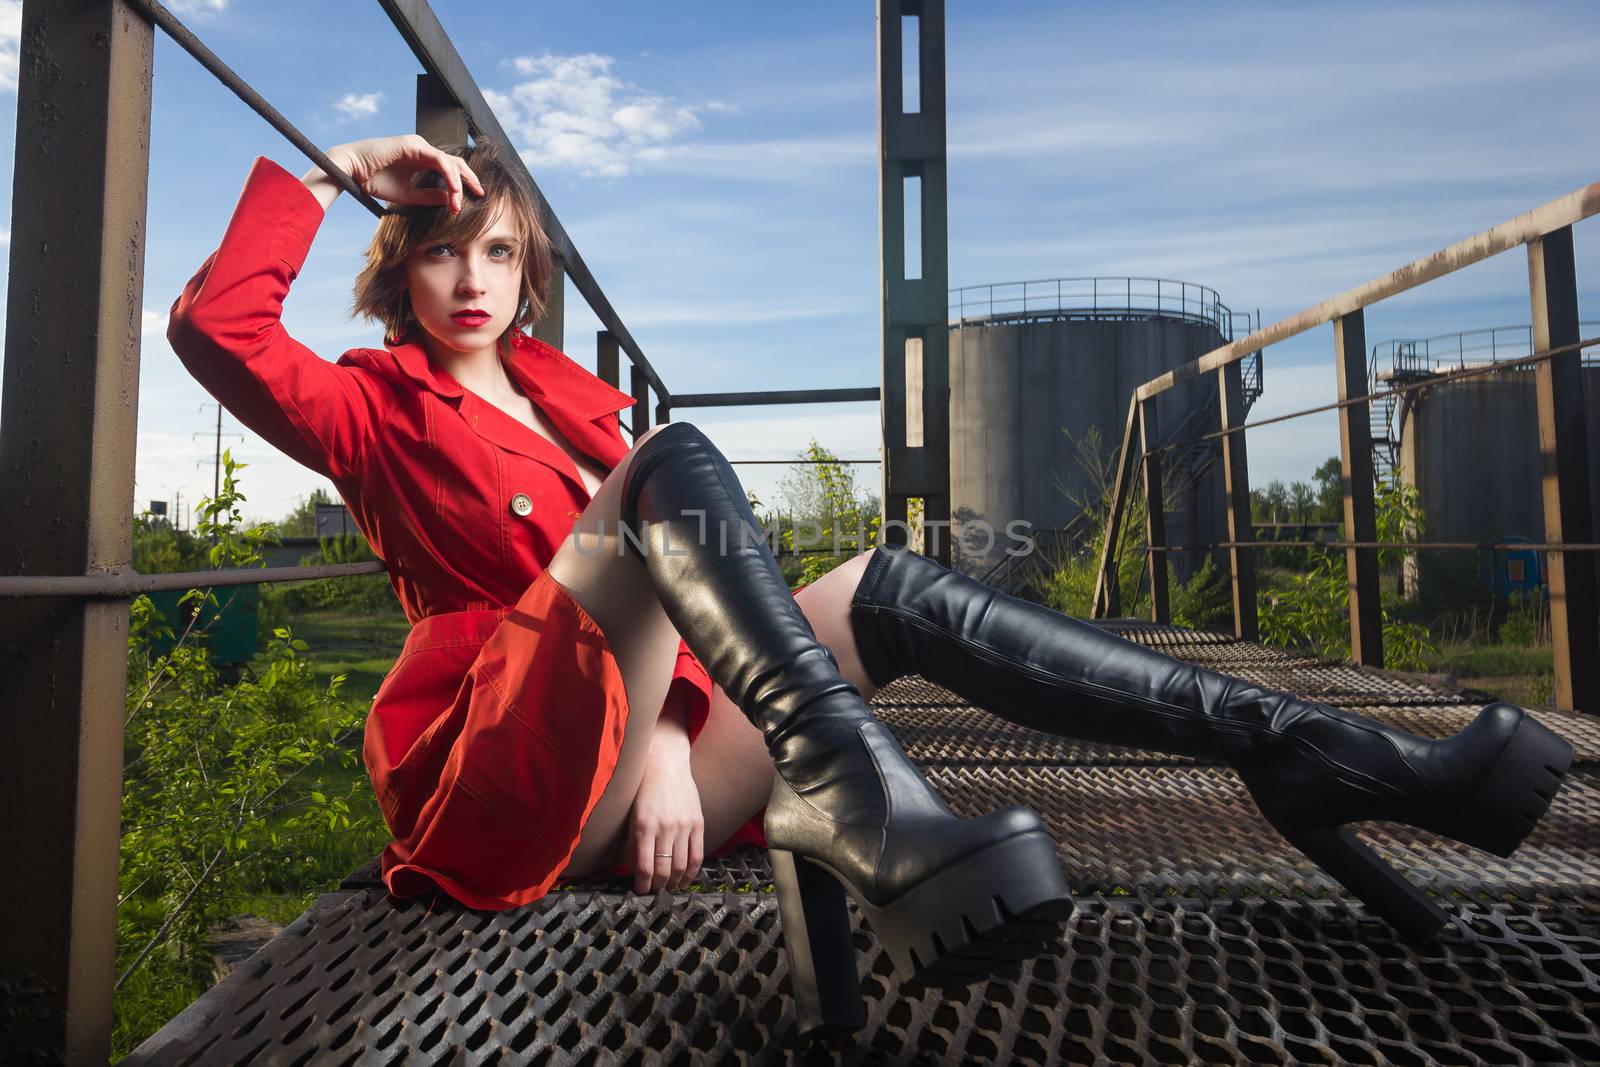 Attractive young woman alluring in sexual lingerie and red coat at grunge industrial setting. Beauty, fashion. Concept: seduction, exhibitionism.